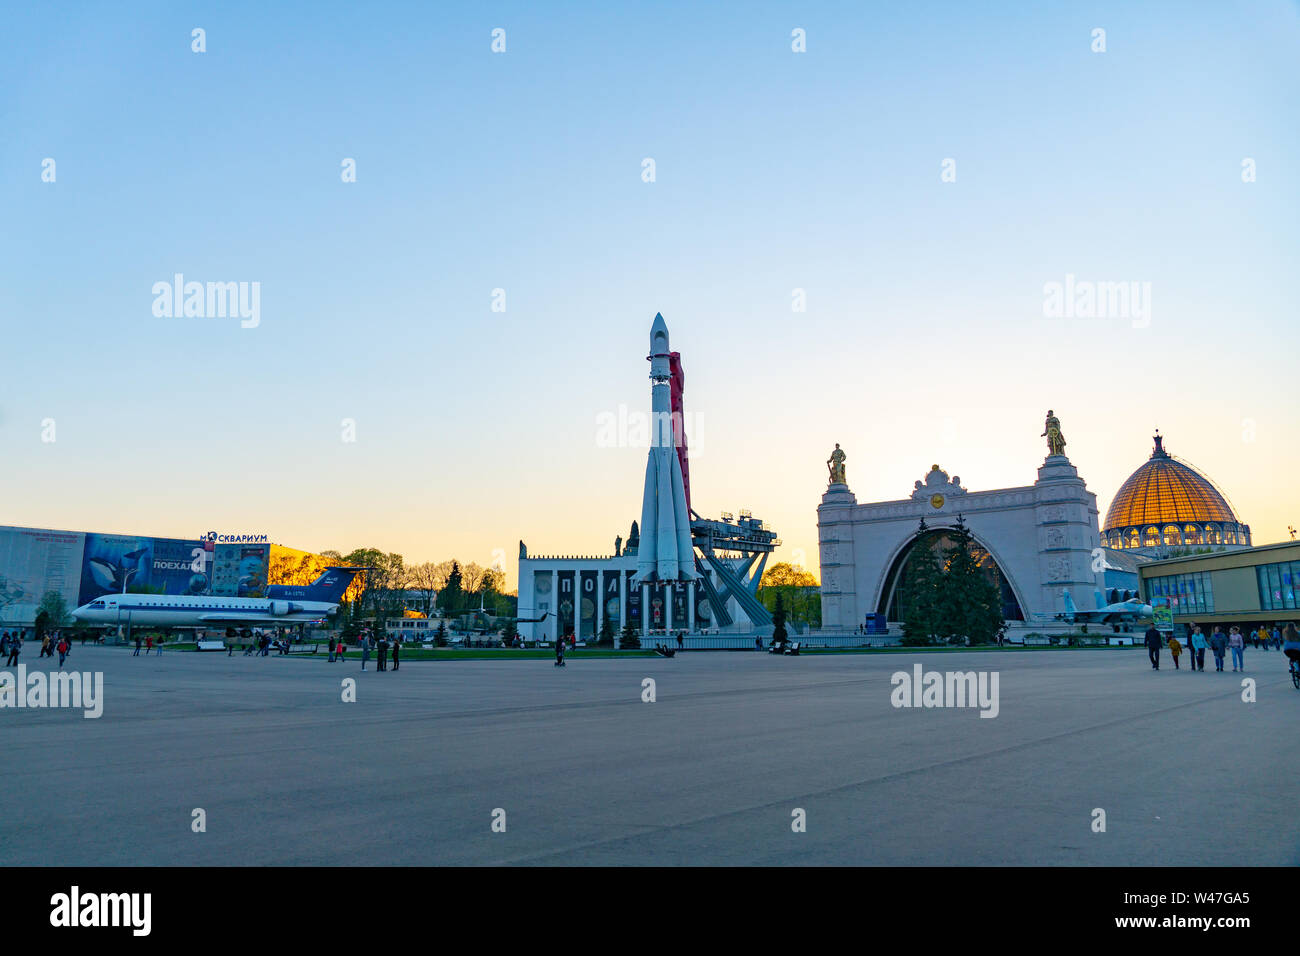 Moscow, Russia, April 30, 2019: Russian spaceship Vostok 1, monument of the first soviet rocket at VDNH. astronautics in USSR, history of Gagarin's fl Stock Photo